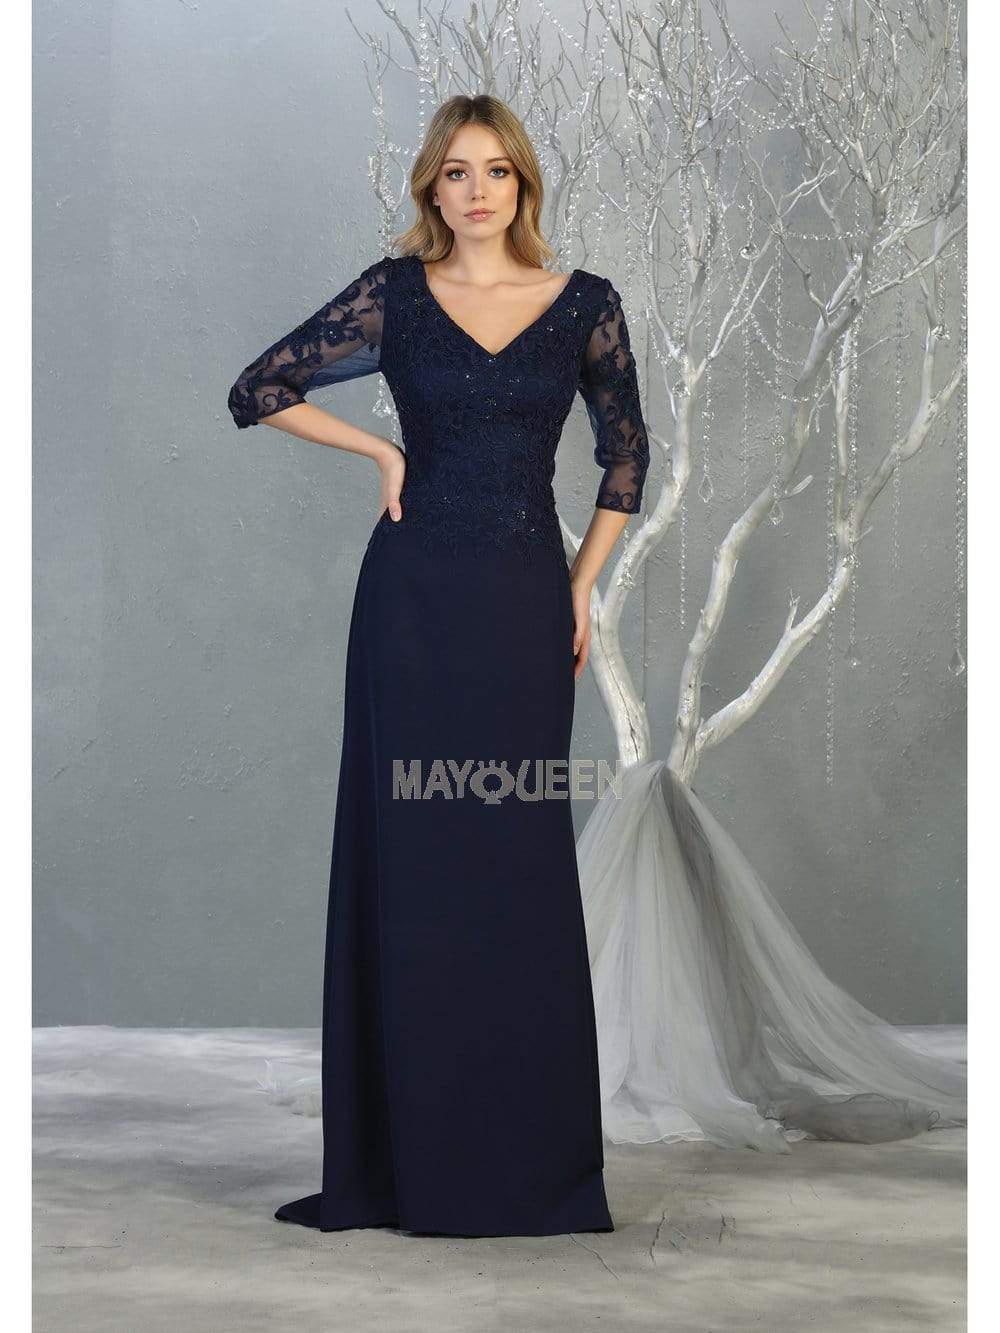 May Queen - MQ1783 Quarter Sleeve Lace Appliqued Trumpet Dress
